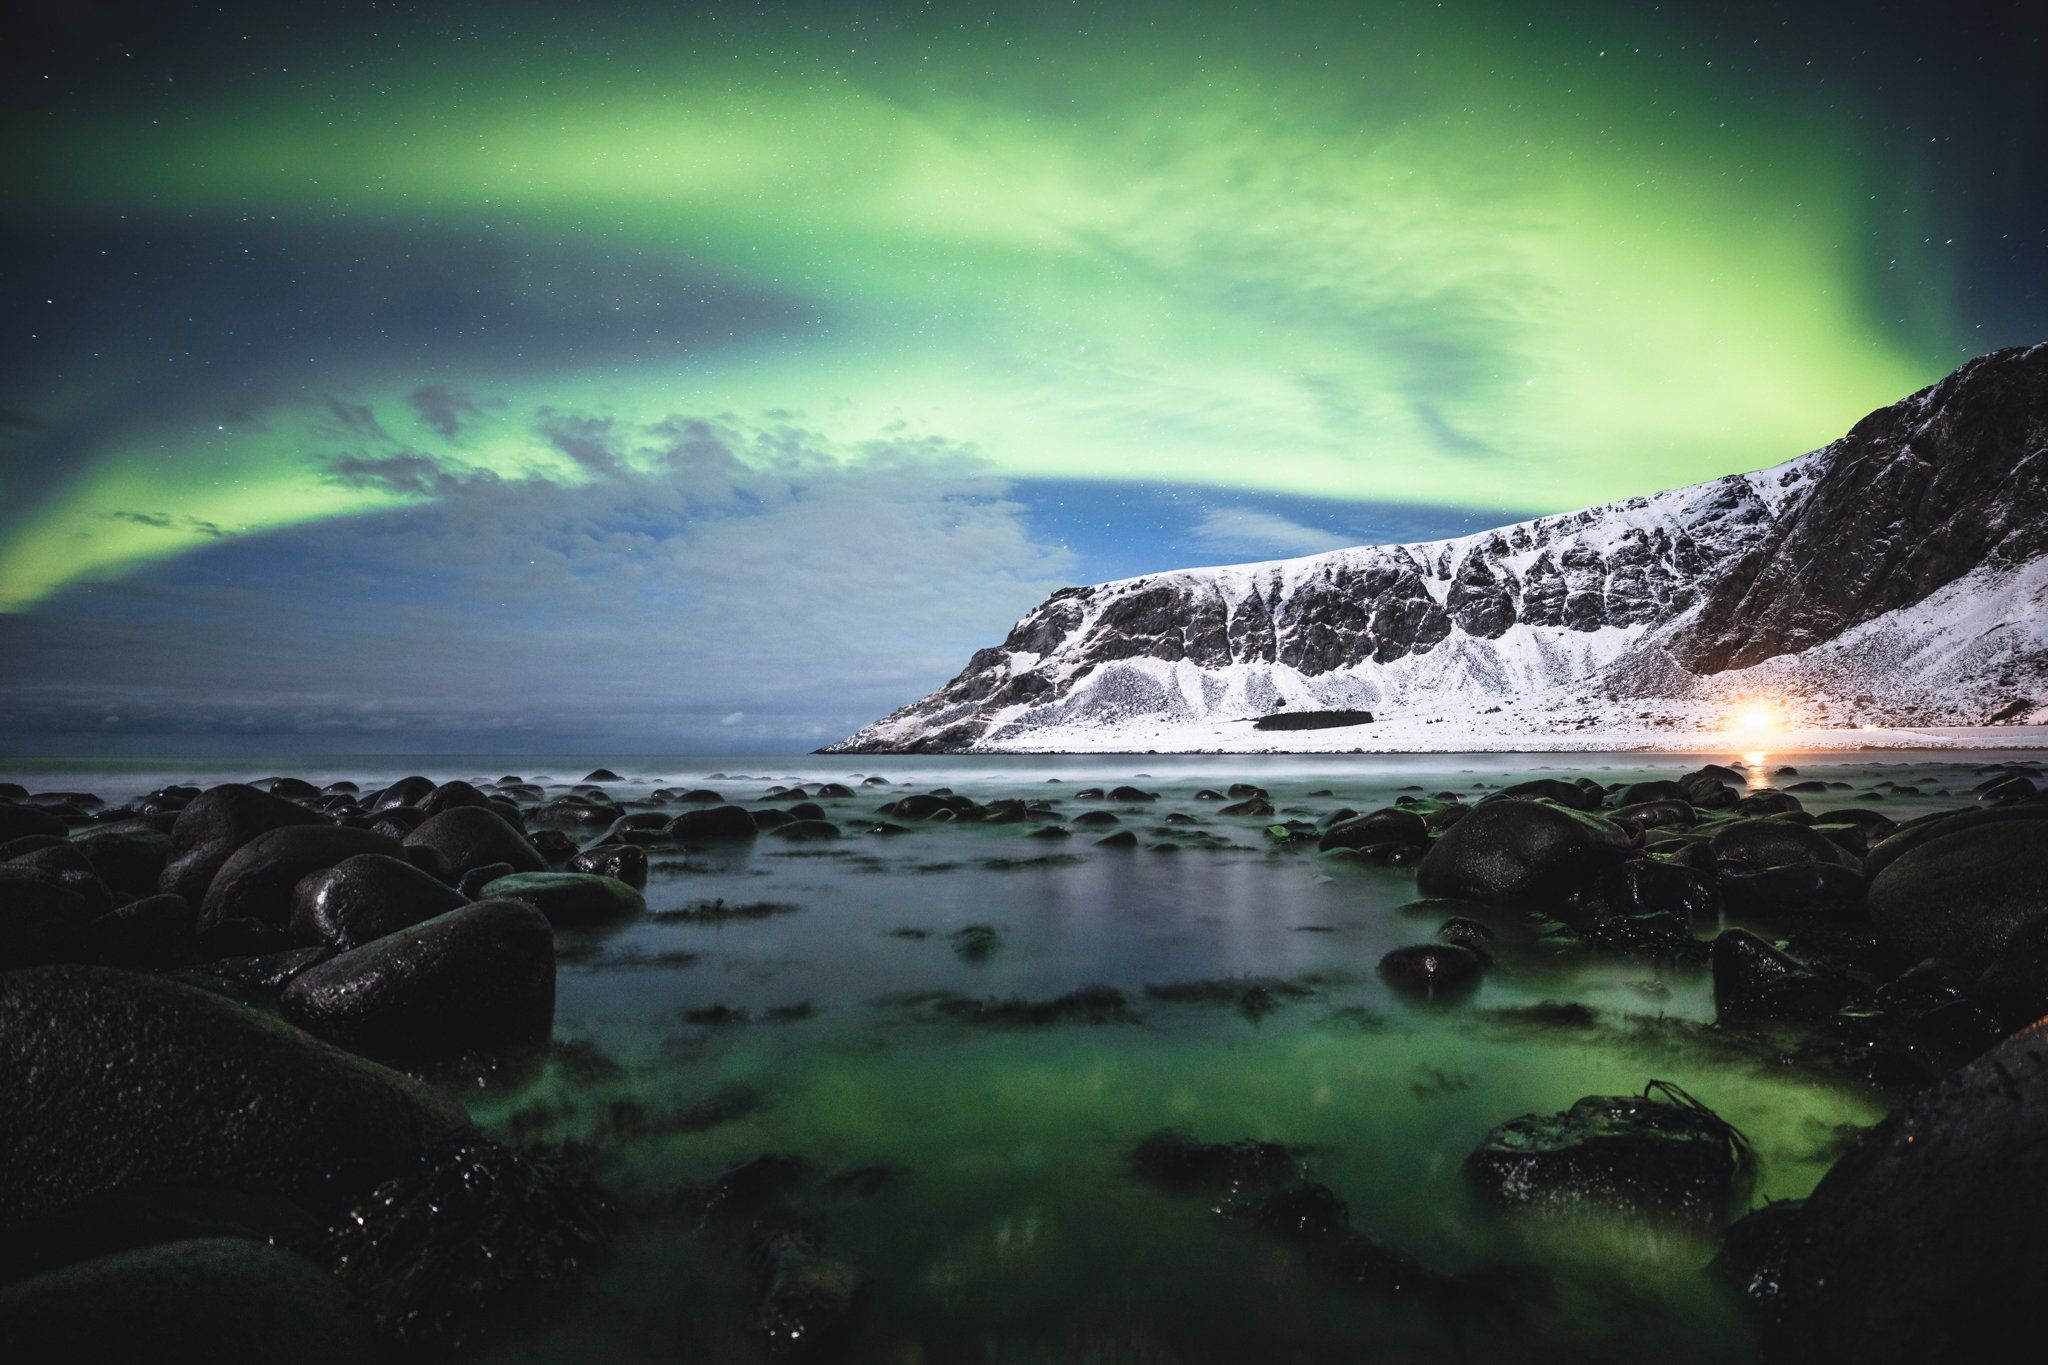 The Northern lights illuminate the sky, casting green reflections in the lake below.  